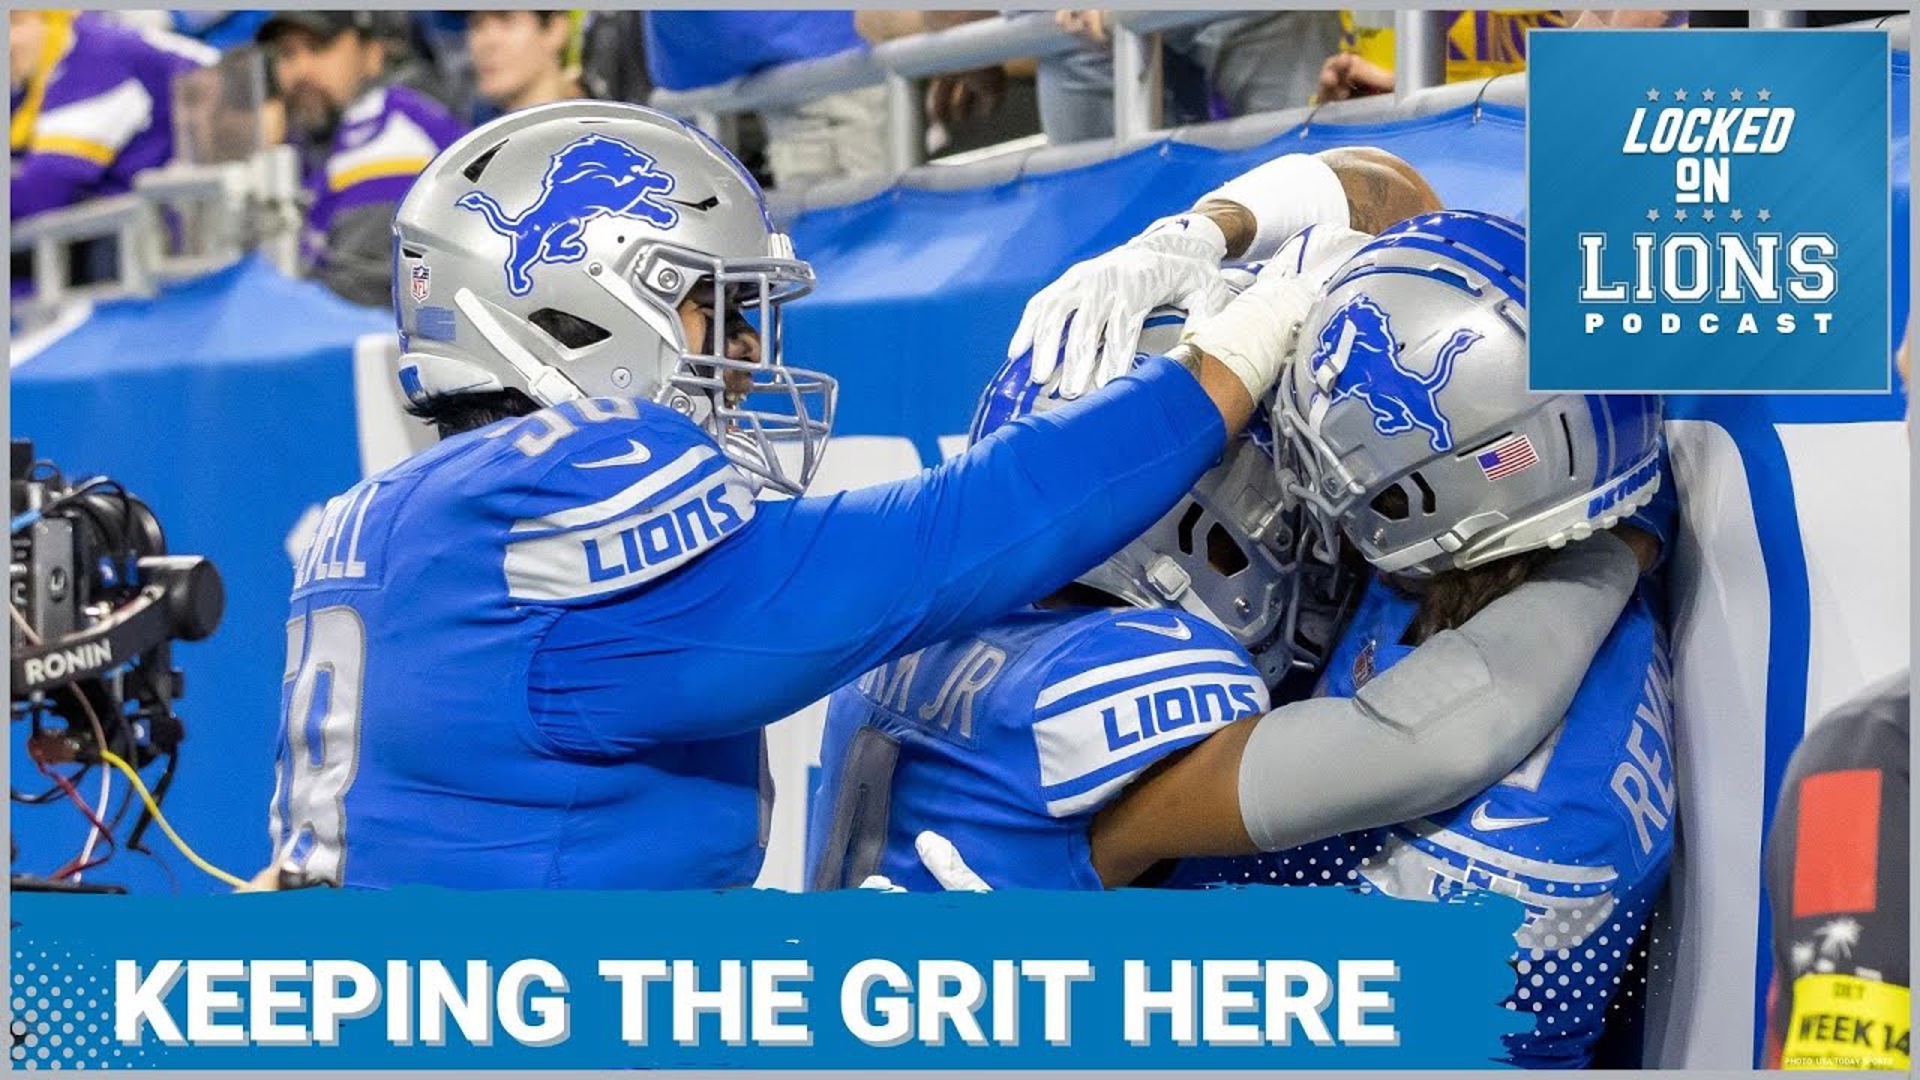 The Detroit Lions playing the retain game. And two very special guests.